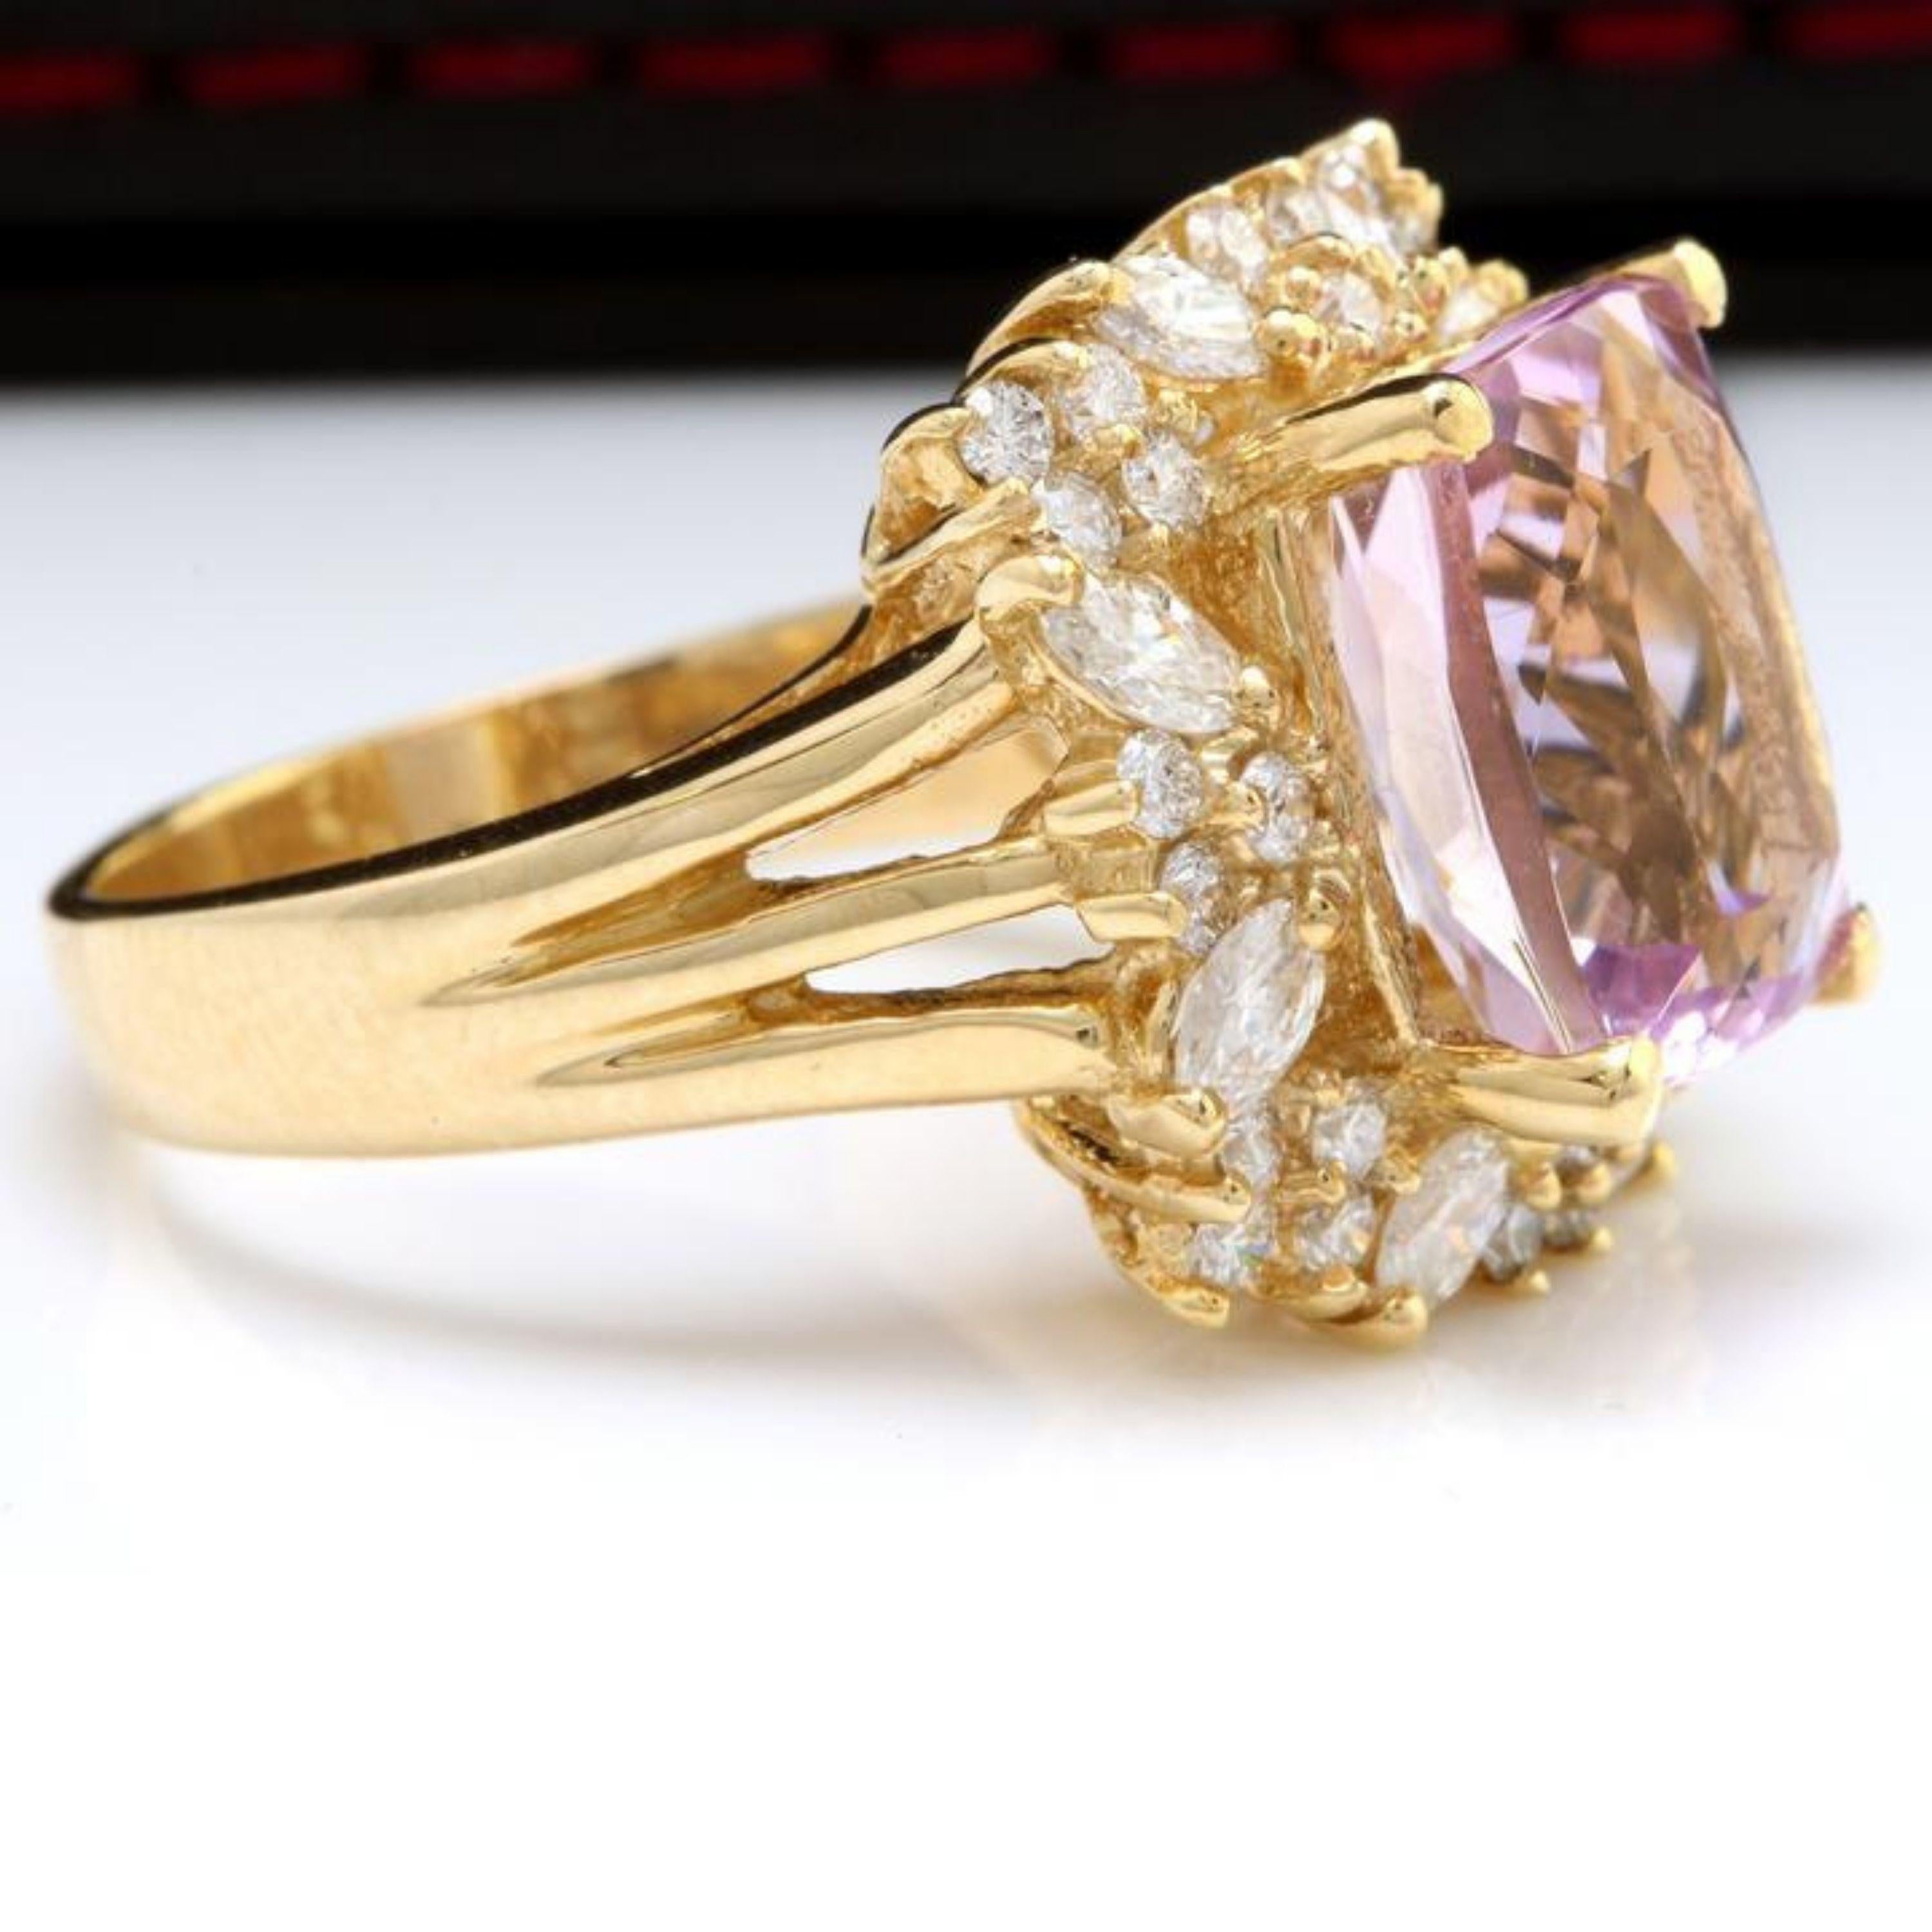 Mixed Cut 8.49 Carat Natural Kunzite and Diamond 14 Karat Solid Yellow Gold Ring For Sale